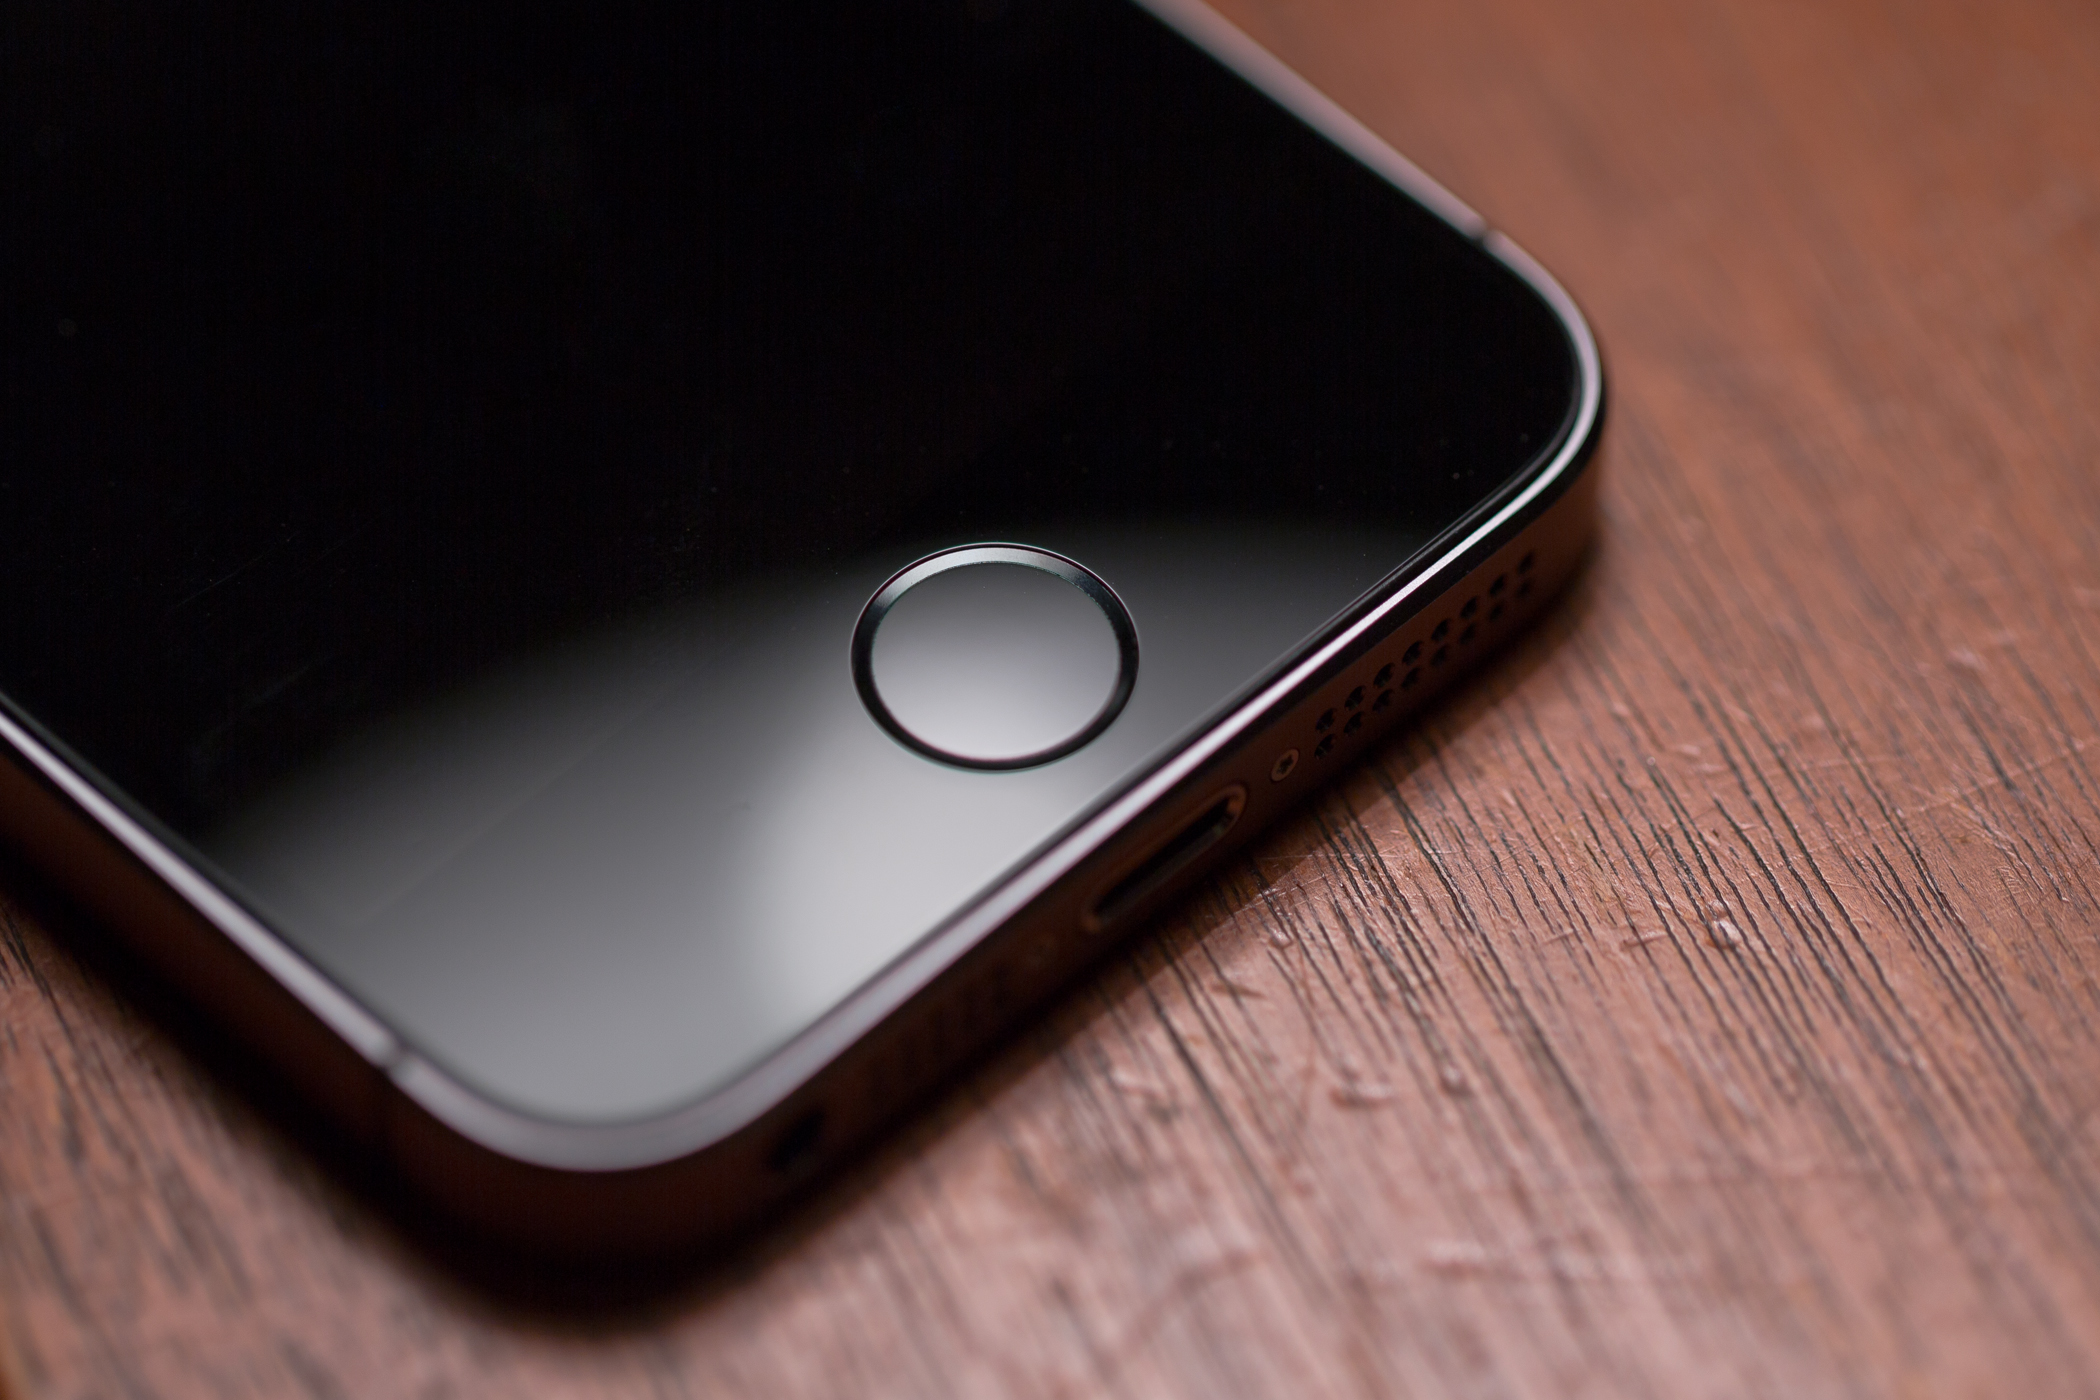 How to set up an on-screen home button on iPhone - Telstra Exchange